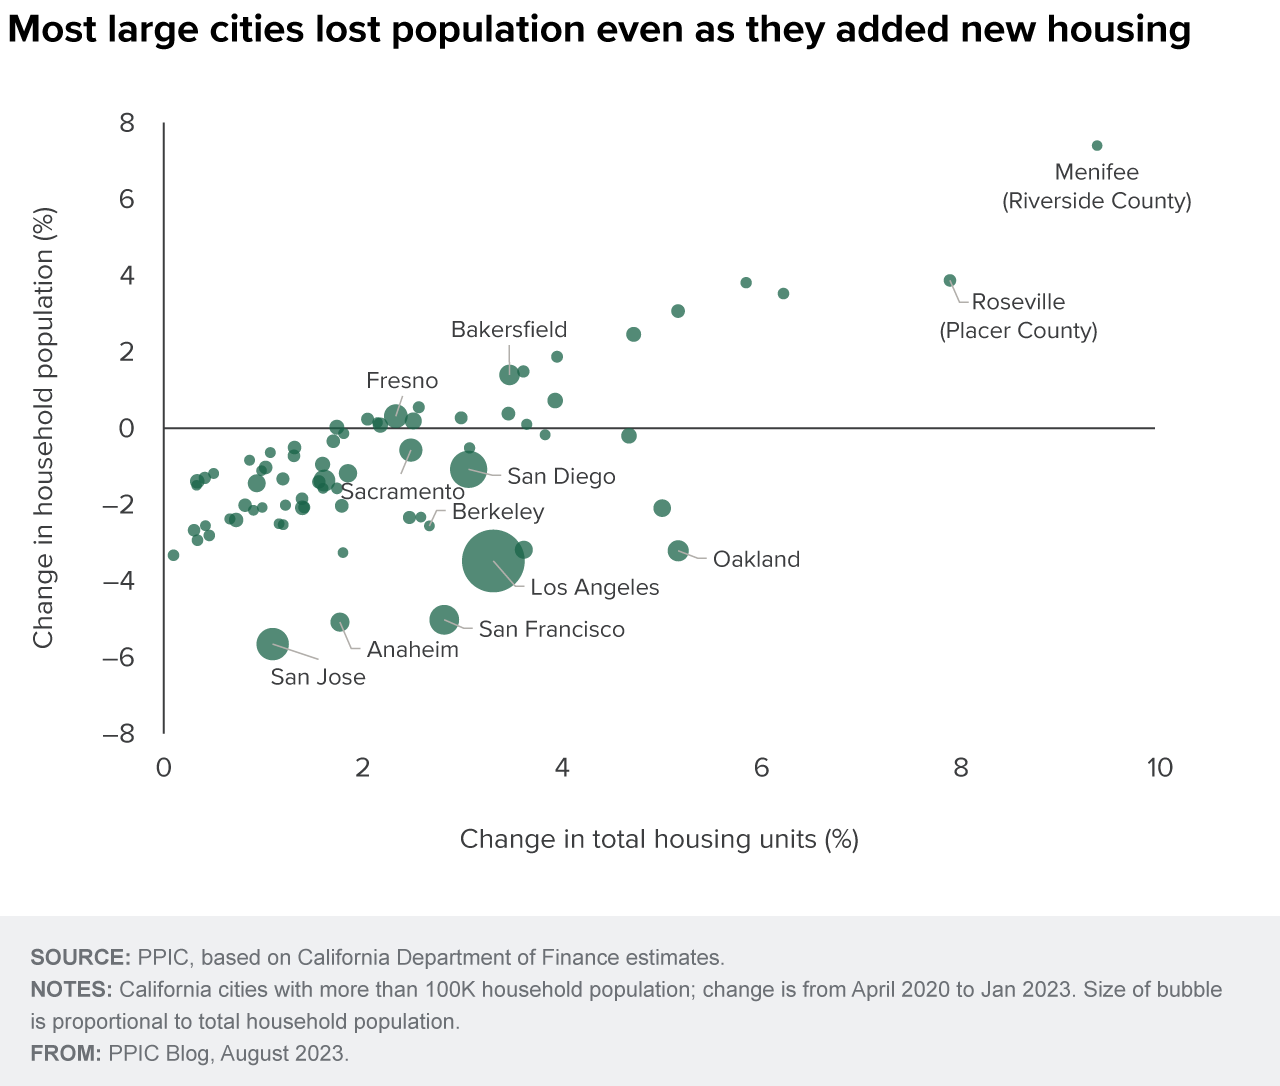 figure - Most large cities lost population even as they added new housing